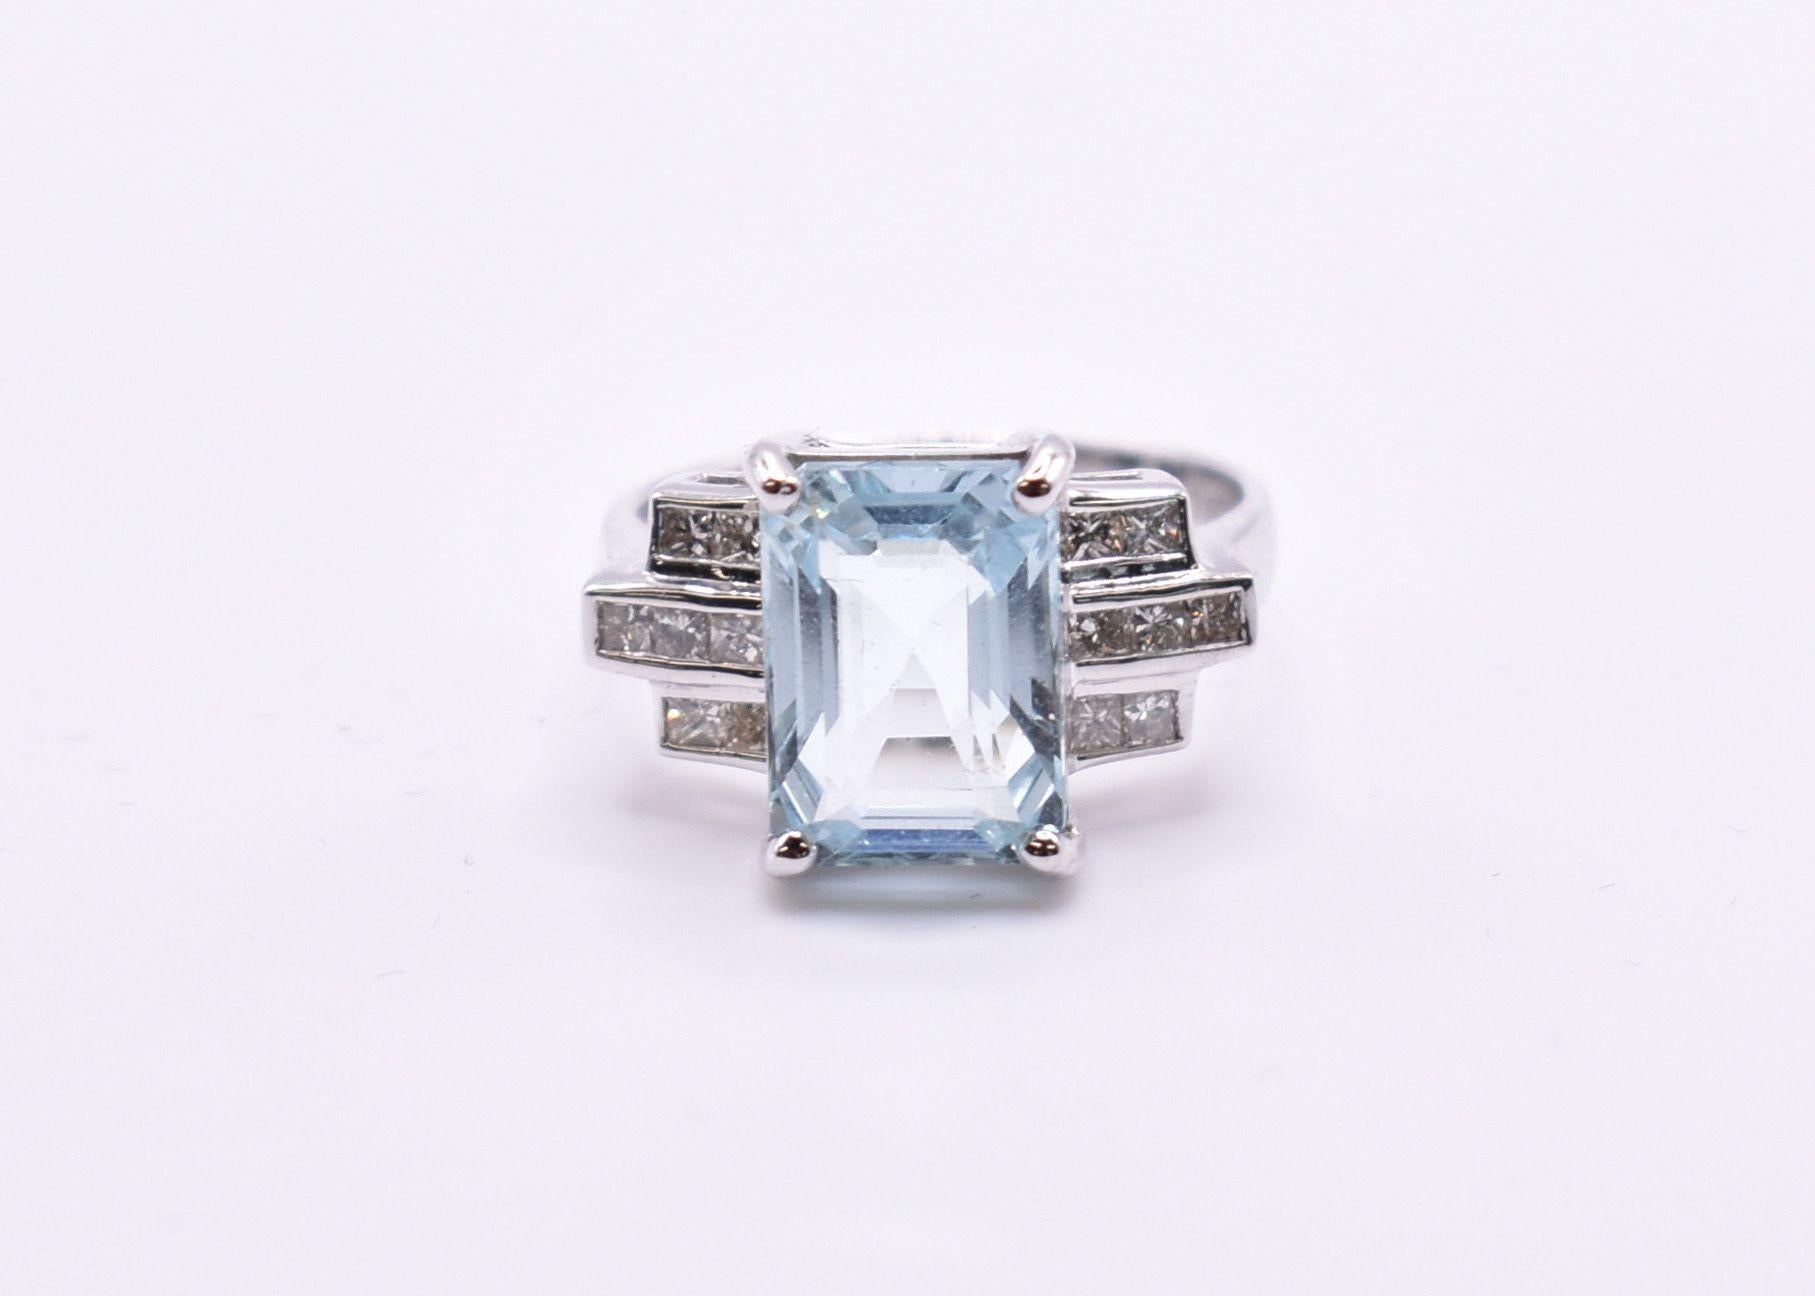 A lovely 18k white gold Aquamarine & Diamond ring. A2= 3.87ct. Diamonds: 0.38ct SI1 H colour.

Ring size: UK N US7

RRP: £3,000